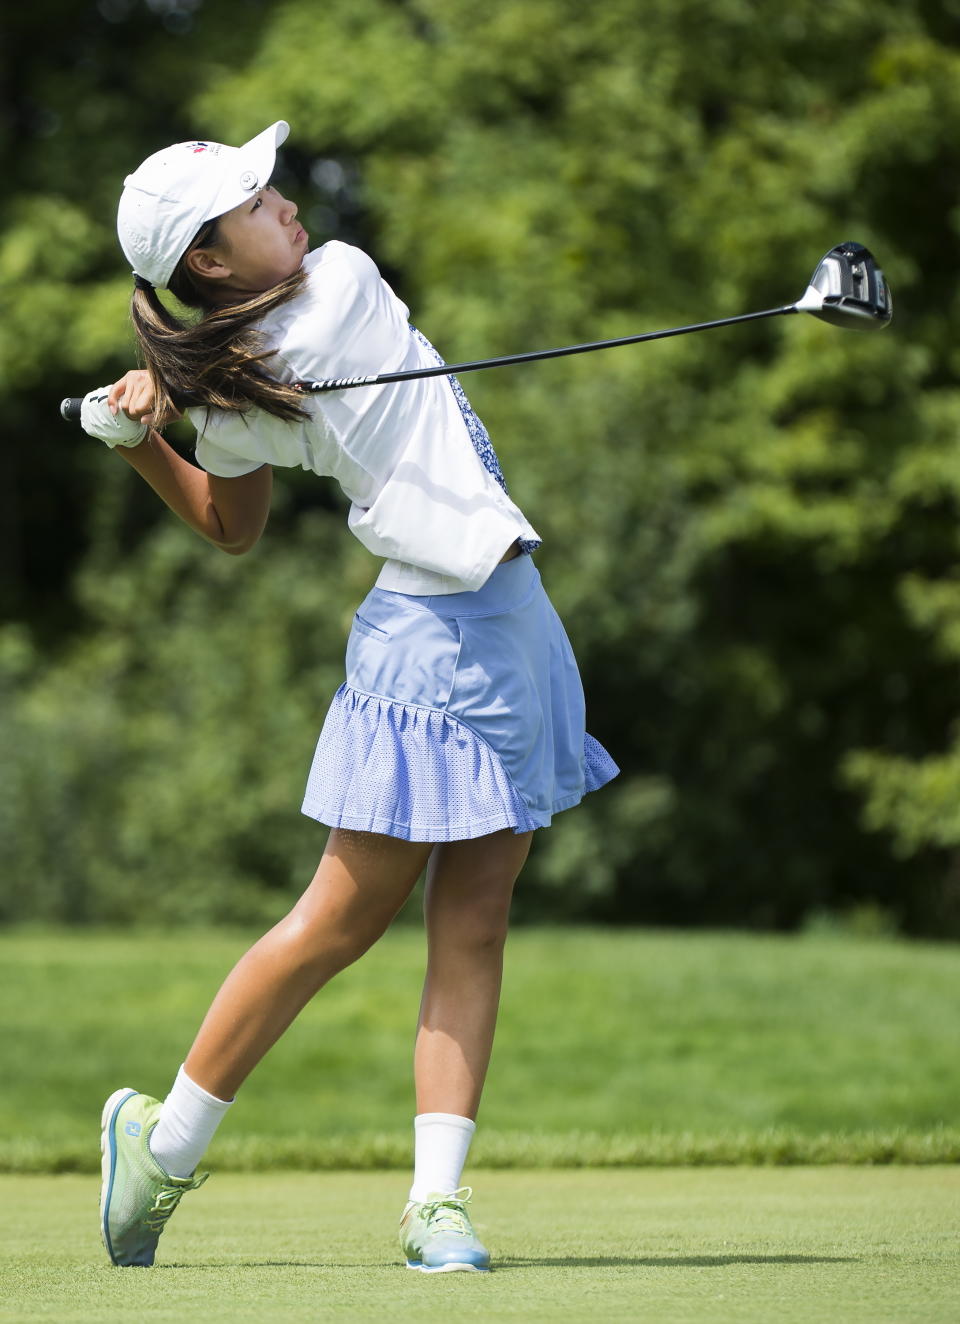 Twelve-year-old Canadian Michelle Liu hits her shot on the 10th hole during the first round of the CP Women's Open golf tournament in Aurora, Ontario, Thursday, Aug. 22, 2019. (Nathan Denette/The Canadian Press via AP)